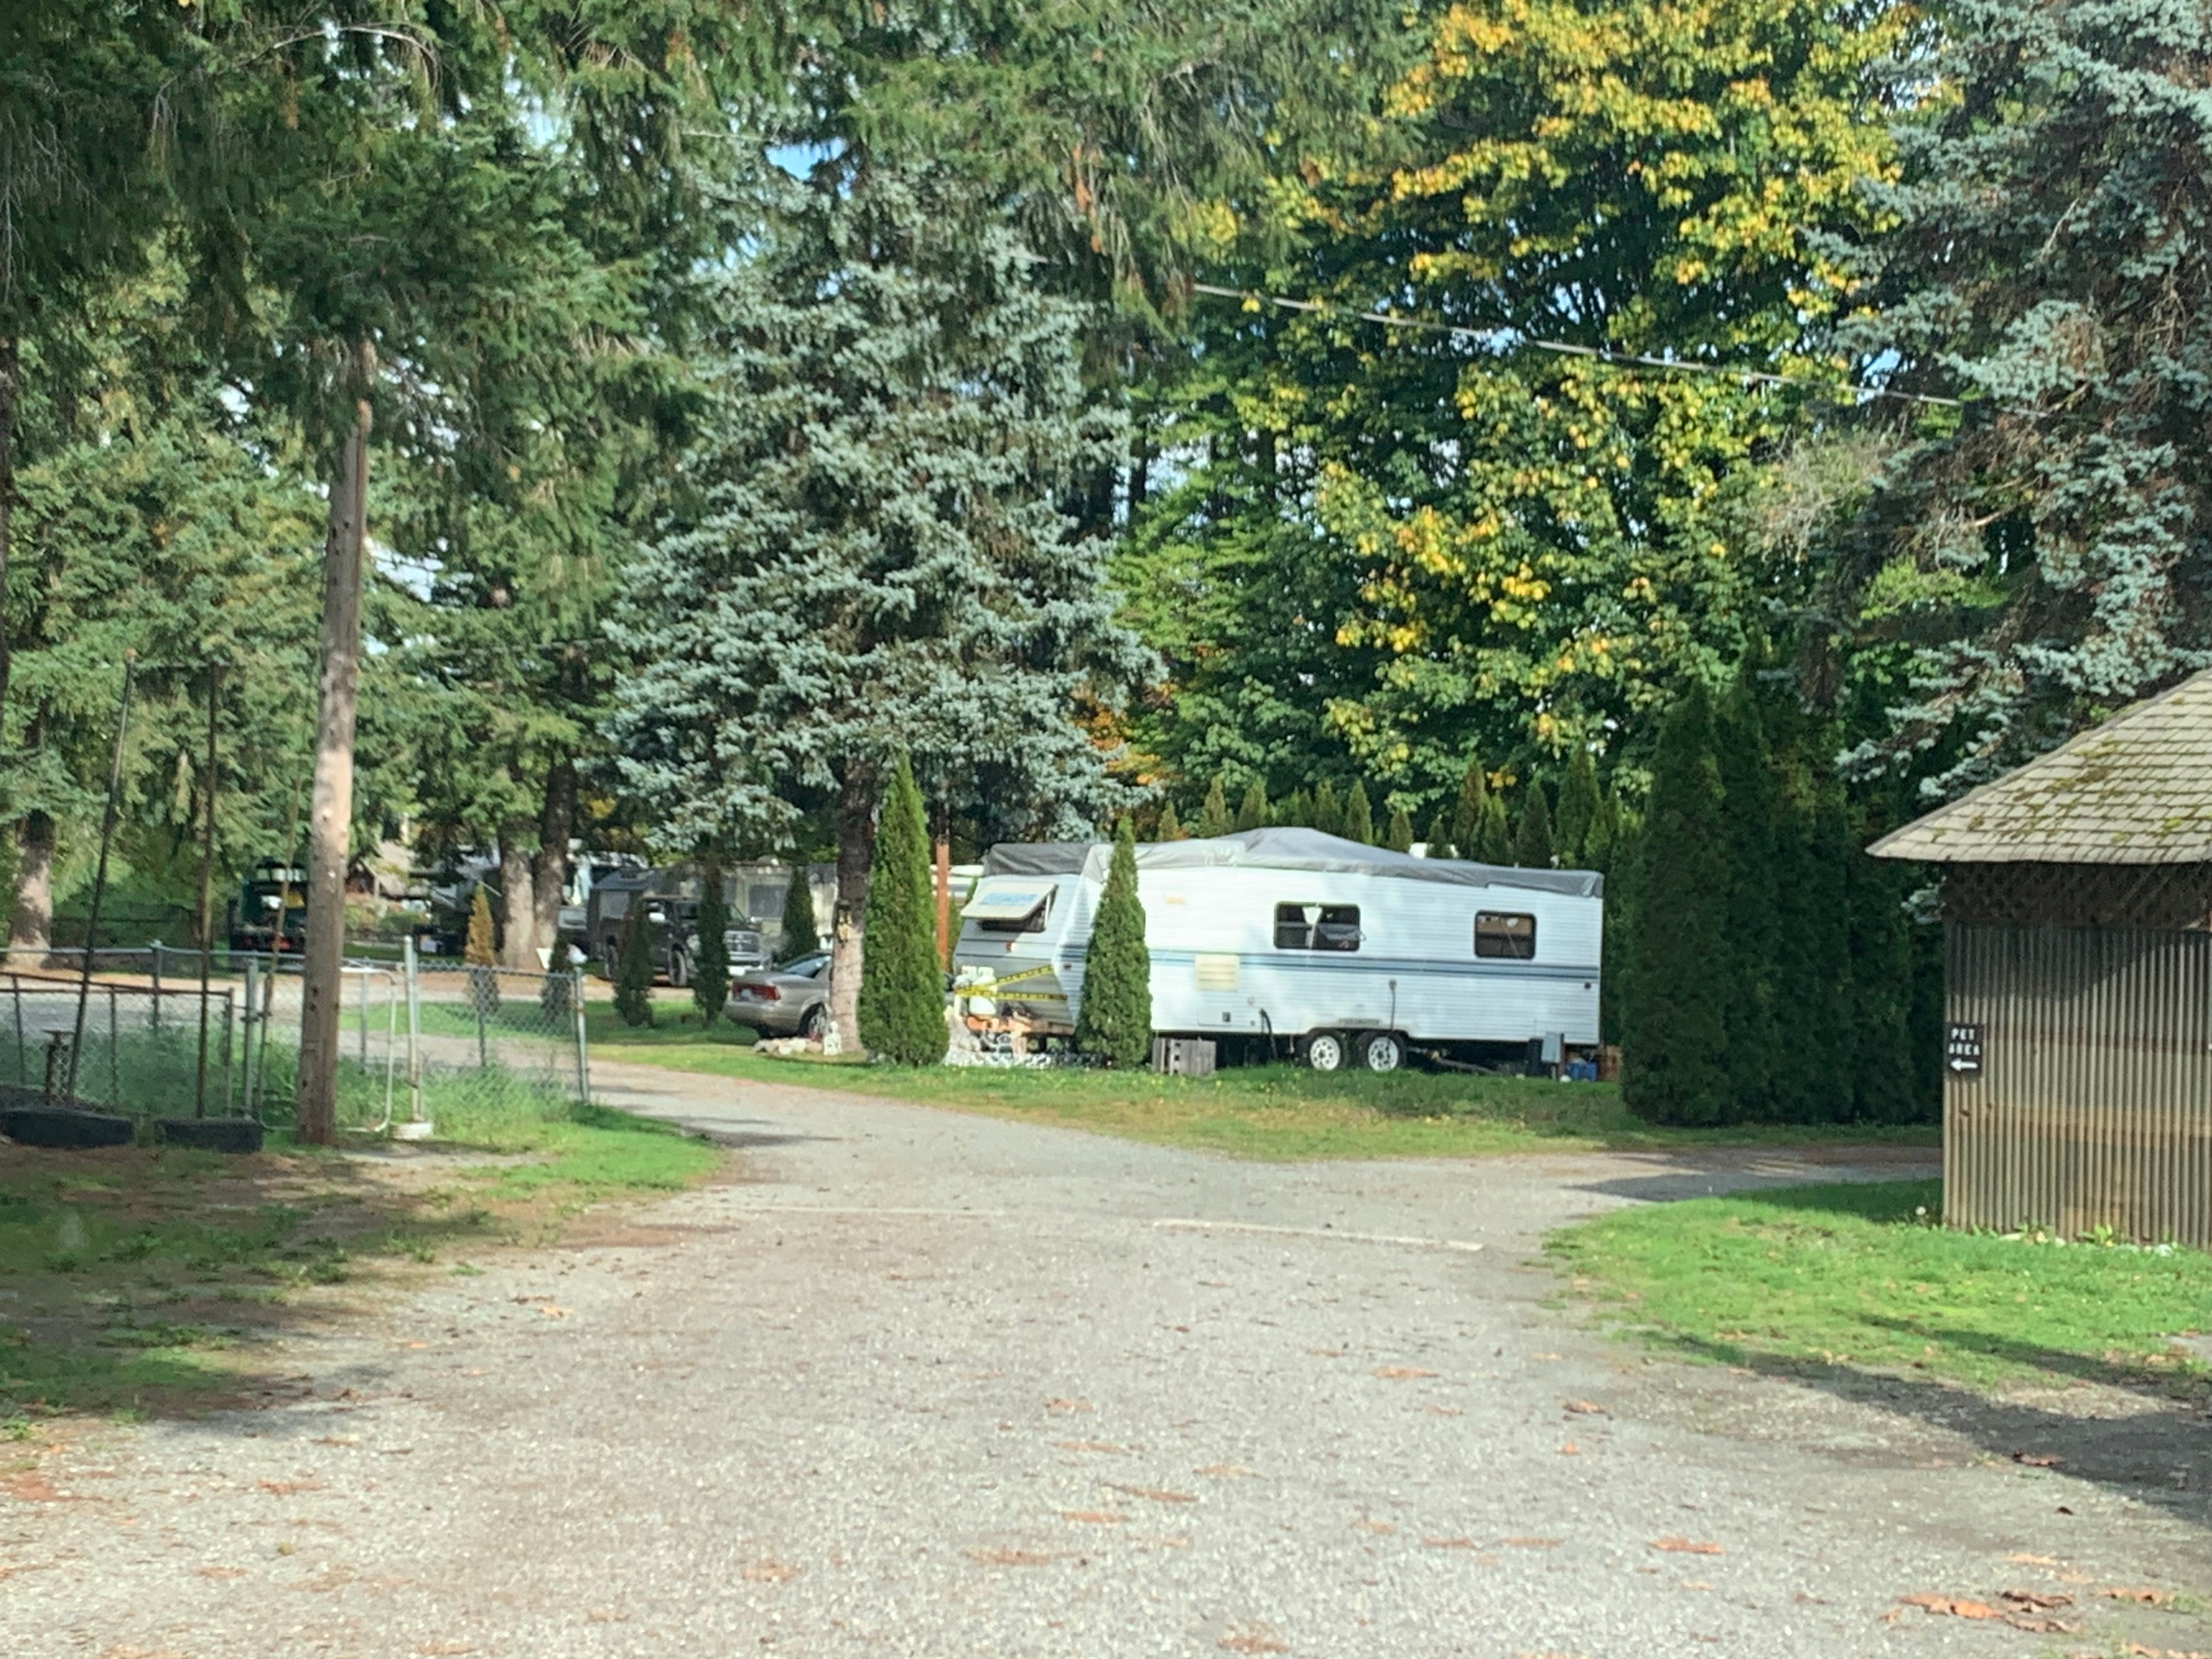 Camper submitted image from Cascade Kamloops RV Park - 3